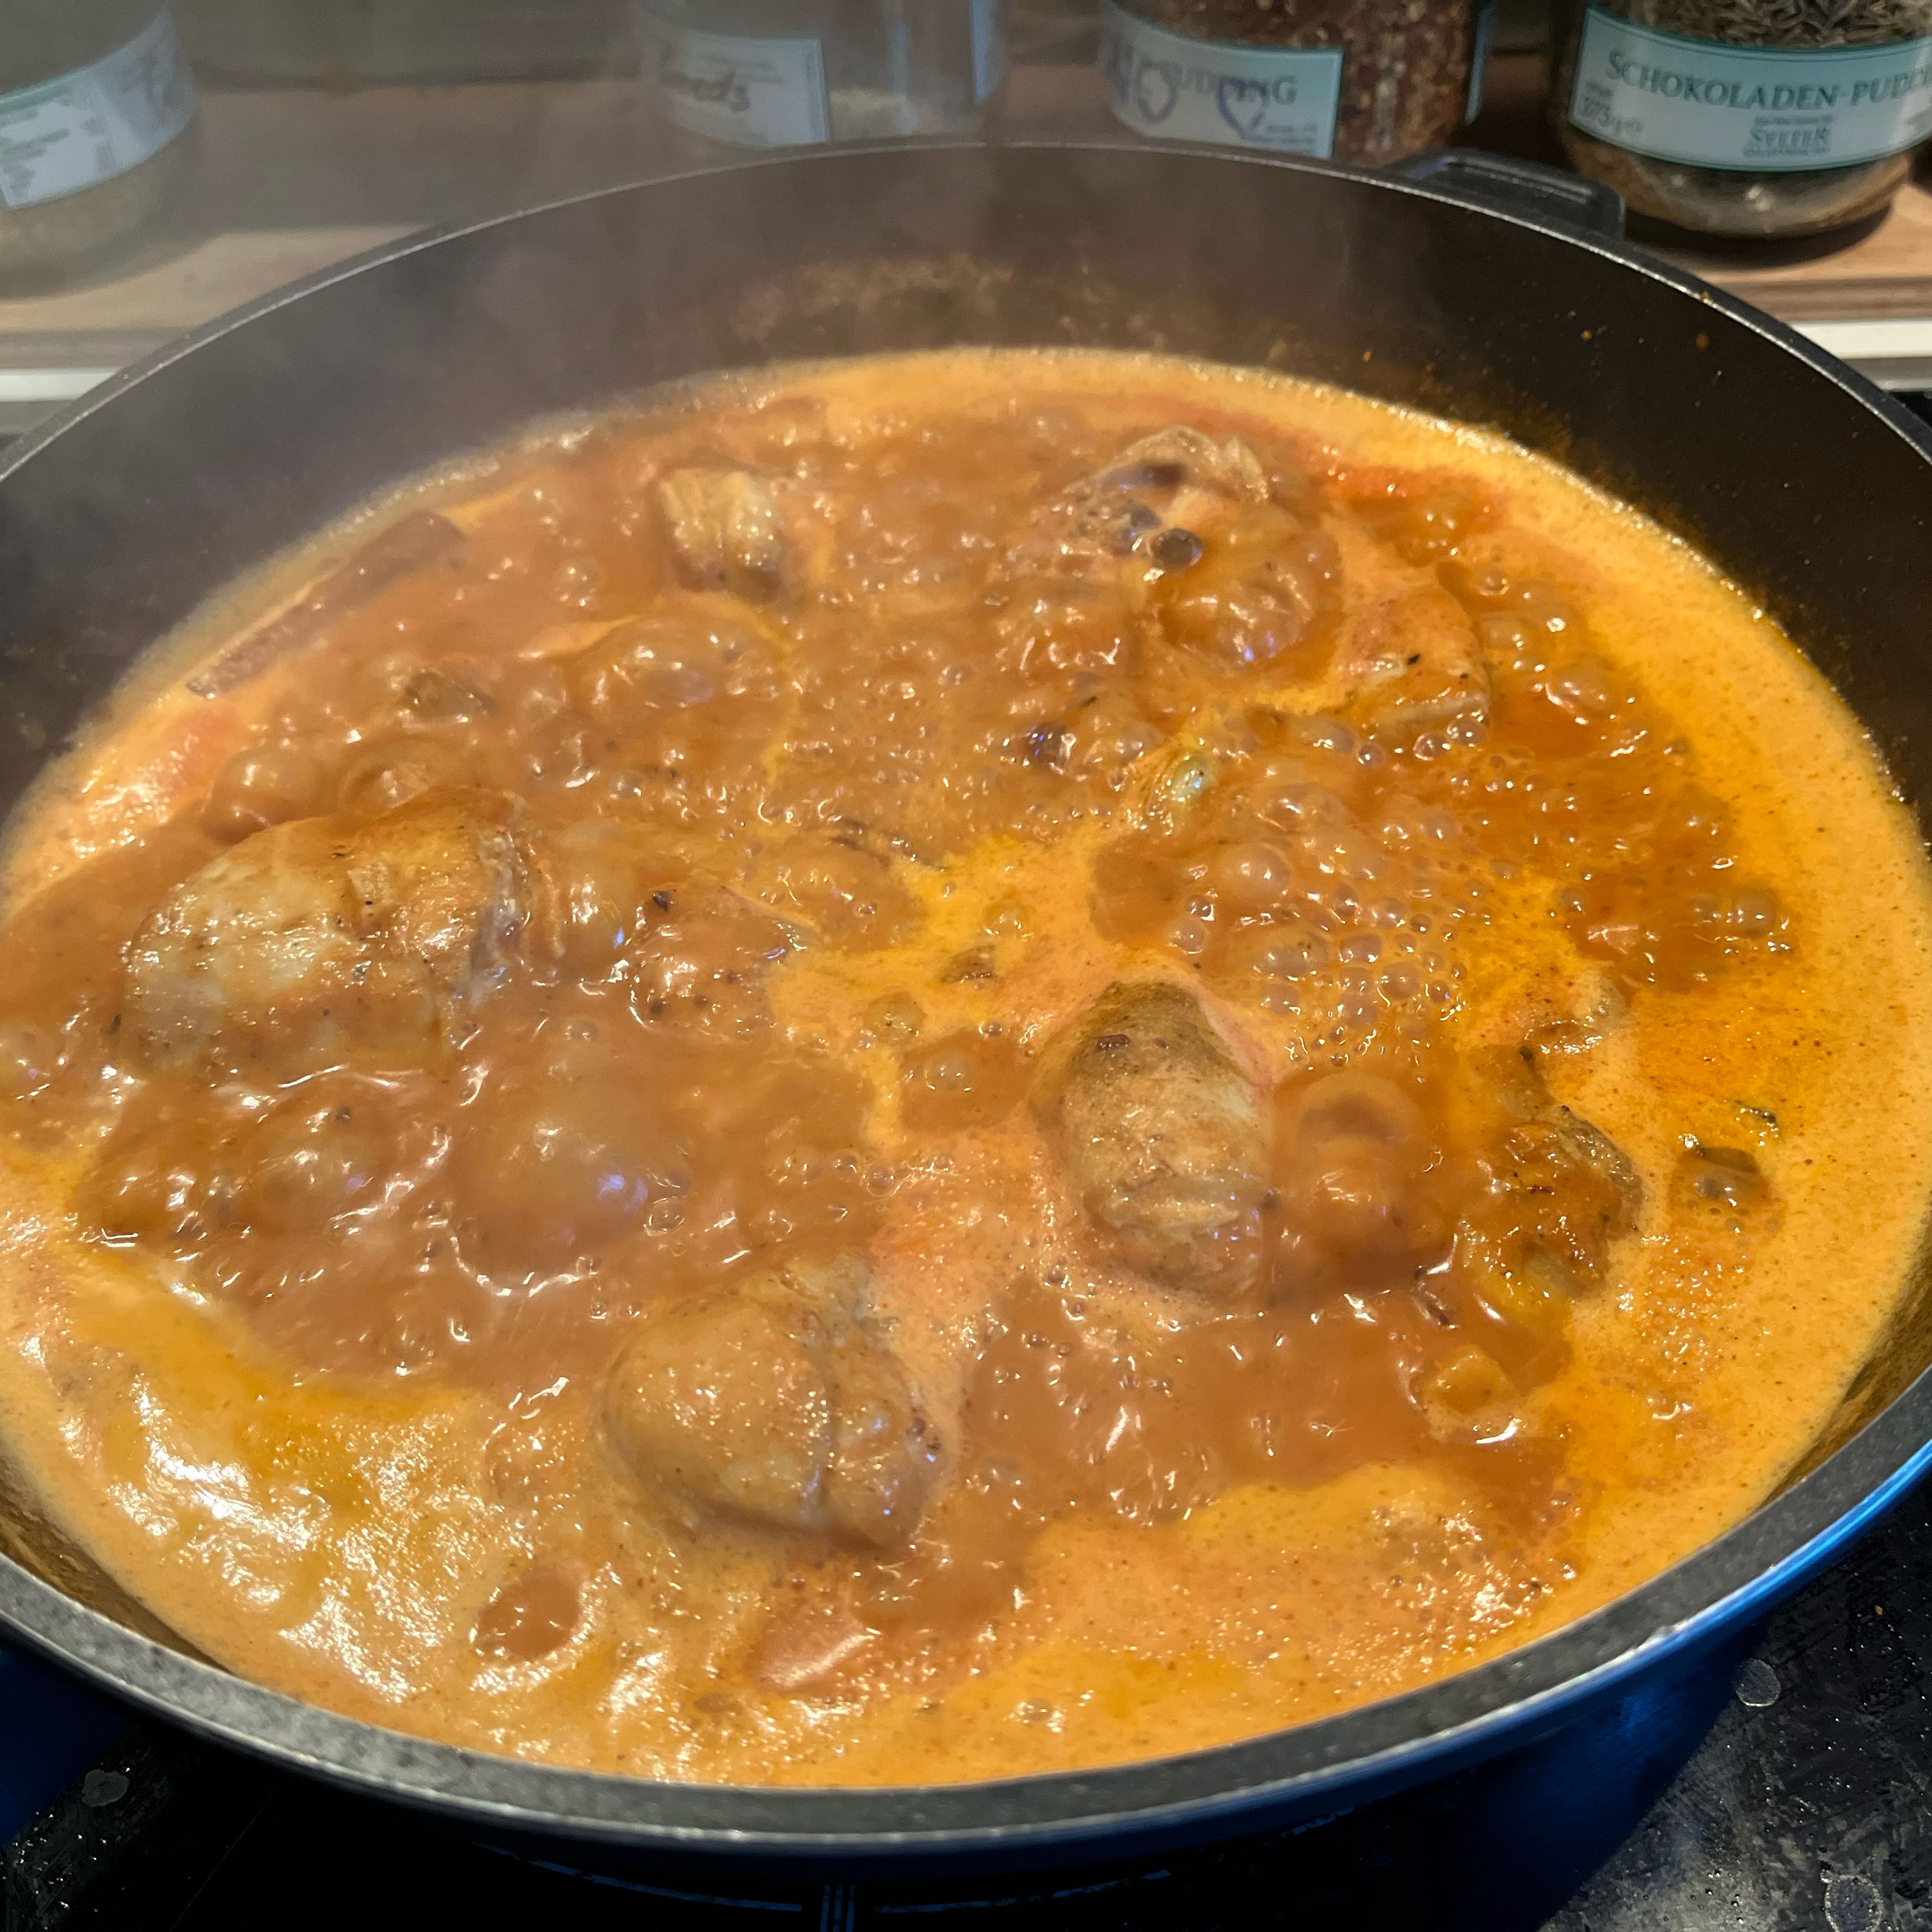 Add tomato purée and bring to a boil, then add coconut milk, stir and bring to a boil again and simmer on low to medium heat until chicken is done (about 30min).